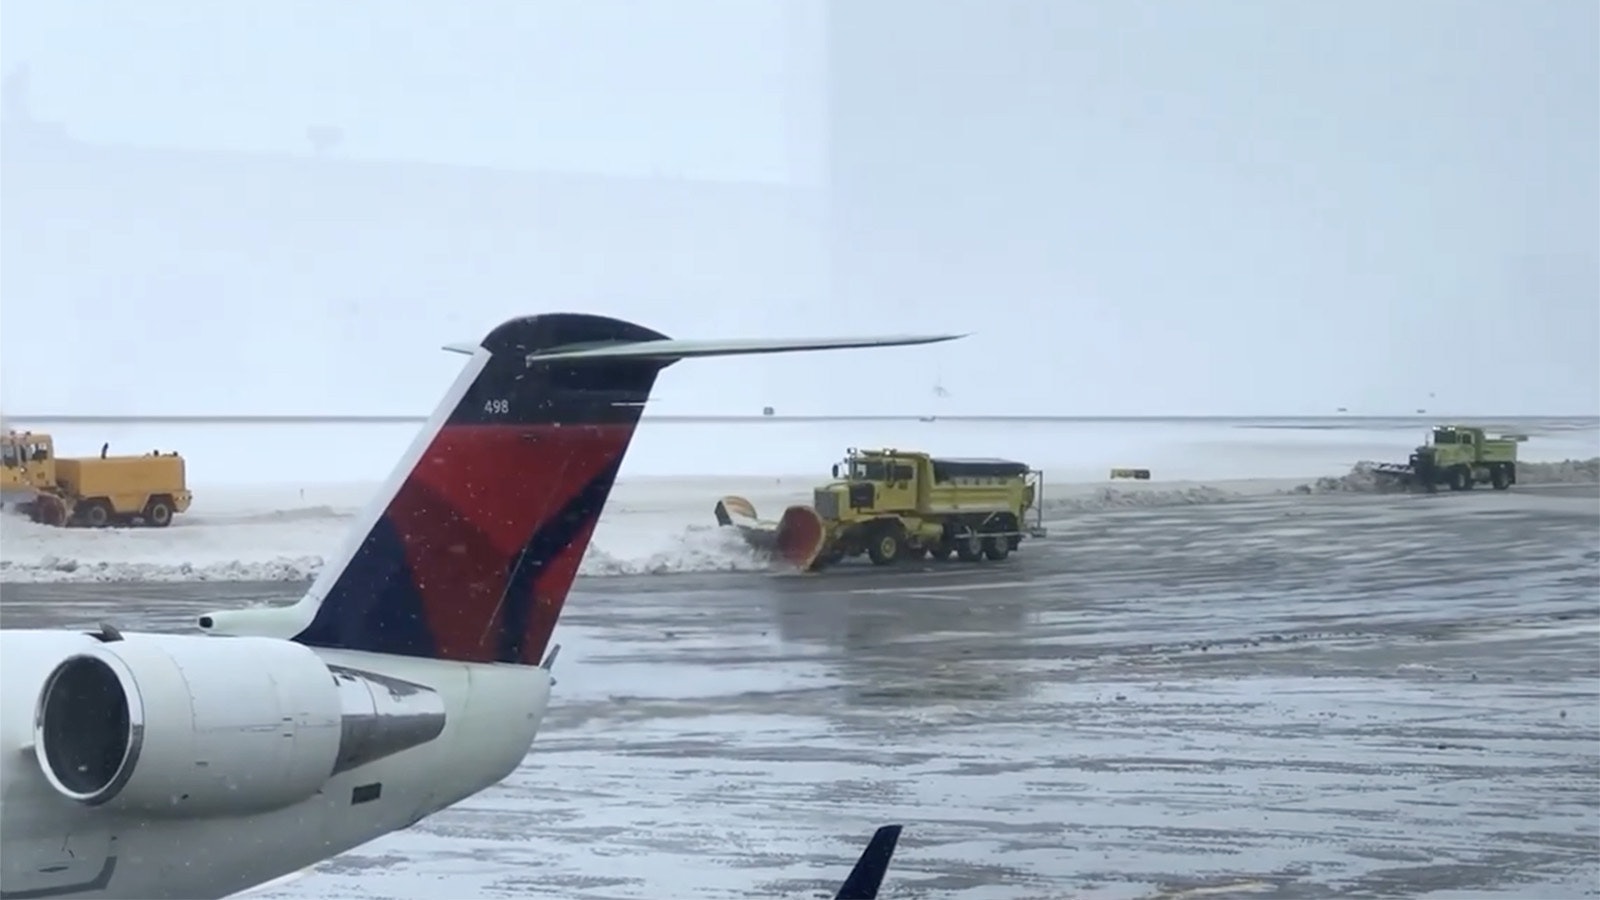 Snow removal teams clear the runways at Casper-Natrona International Airport after a winter snowstorm.